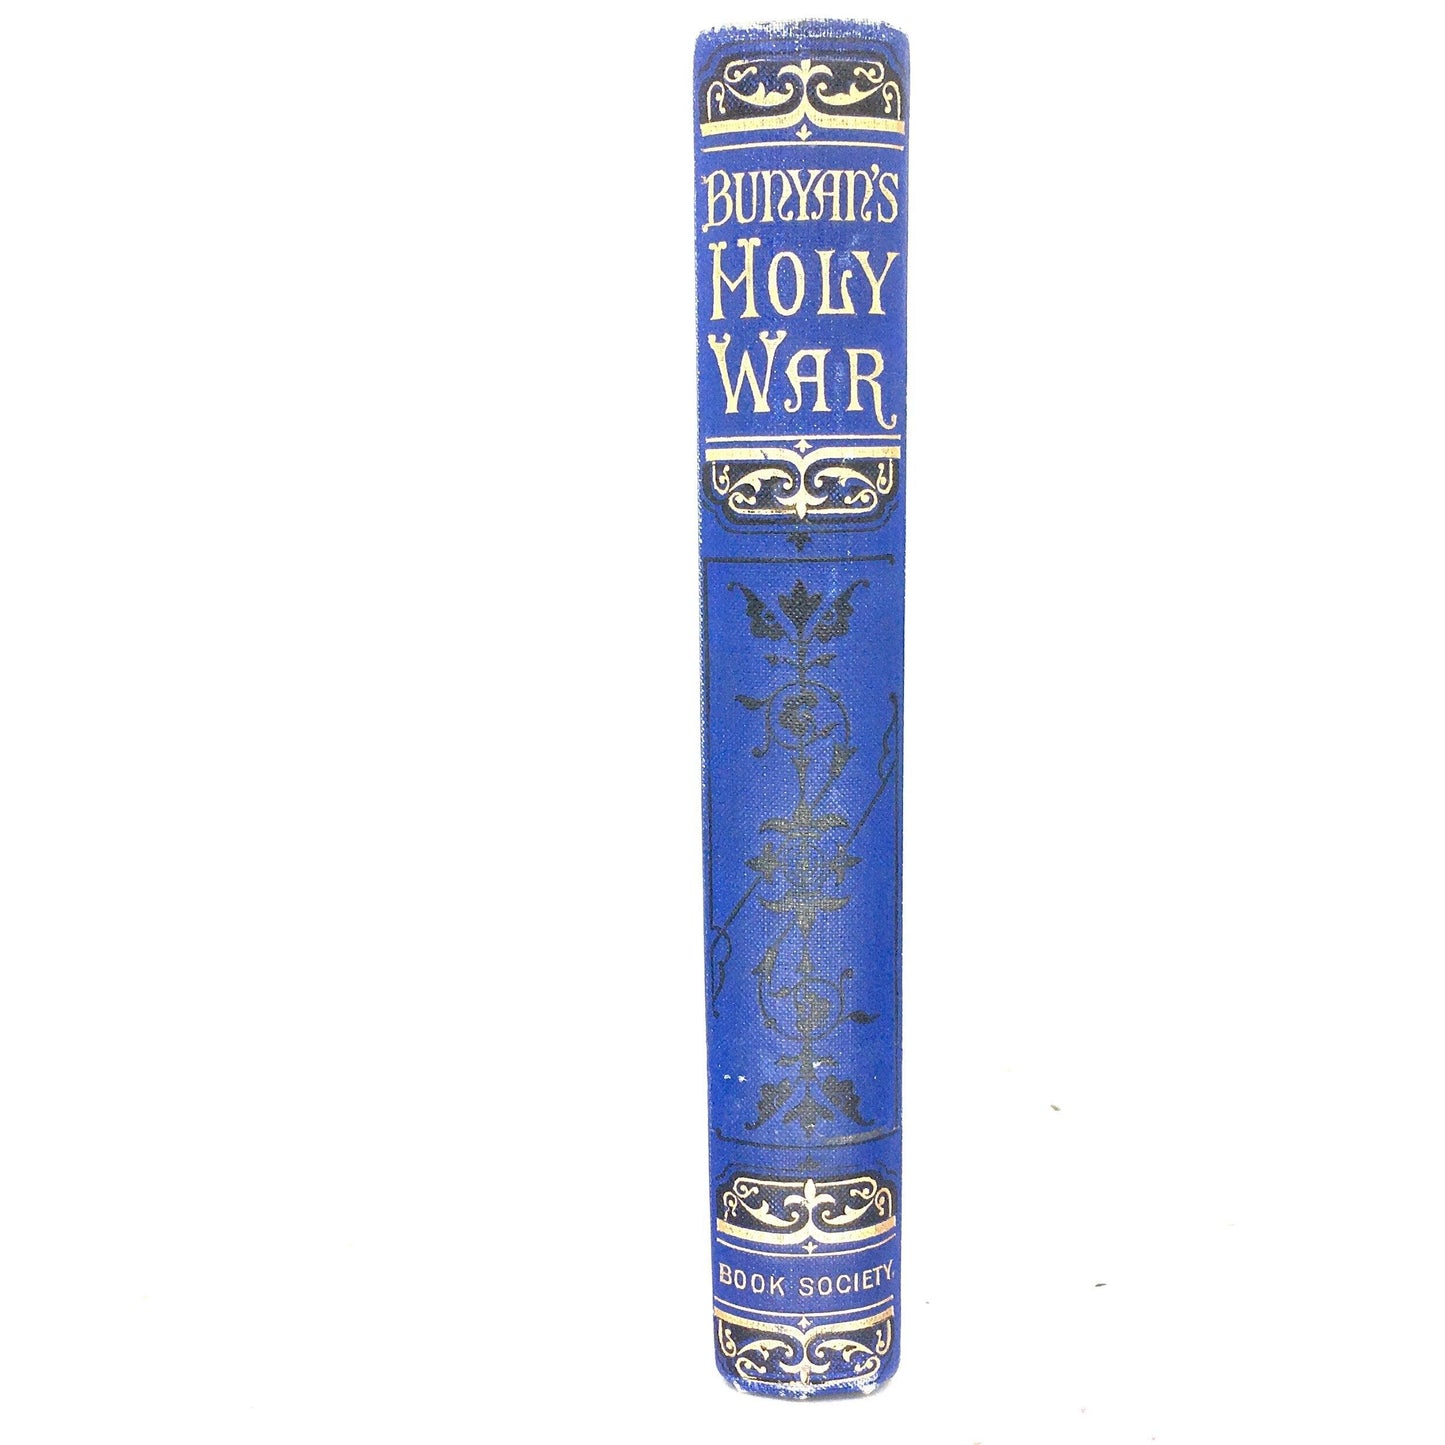 BUNYAN, John “The Holy War, Made by Shaddai Upon Diabolus” [The Book Society, c1880s] - Buzz Bookstore